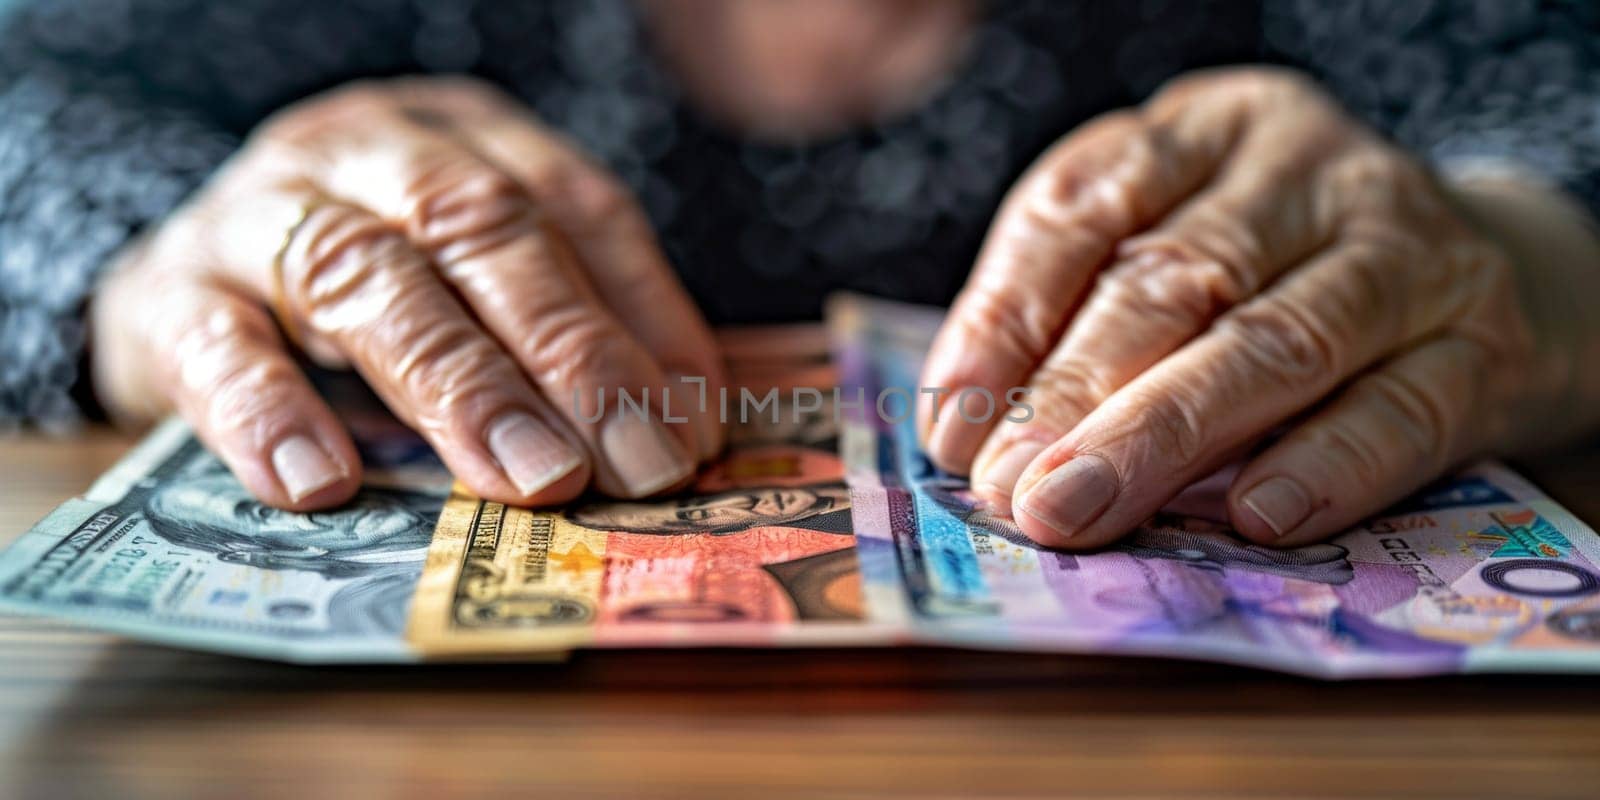 An older woman meticulously counts her wealth, stacks of money neatly organized on the table in front of her.